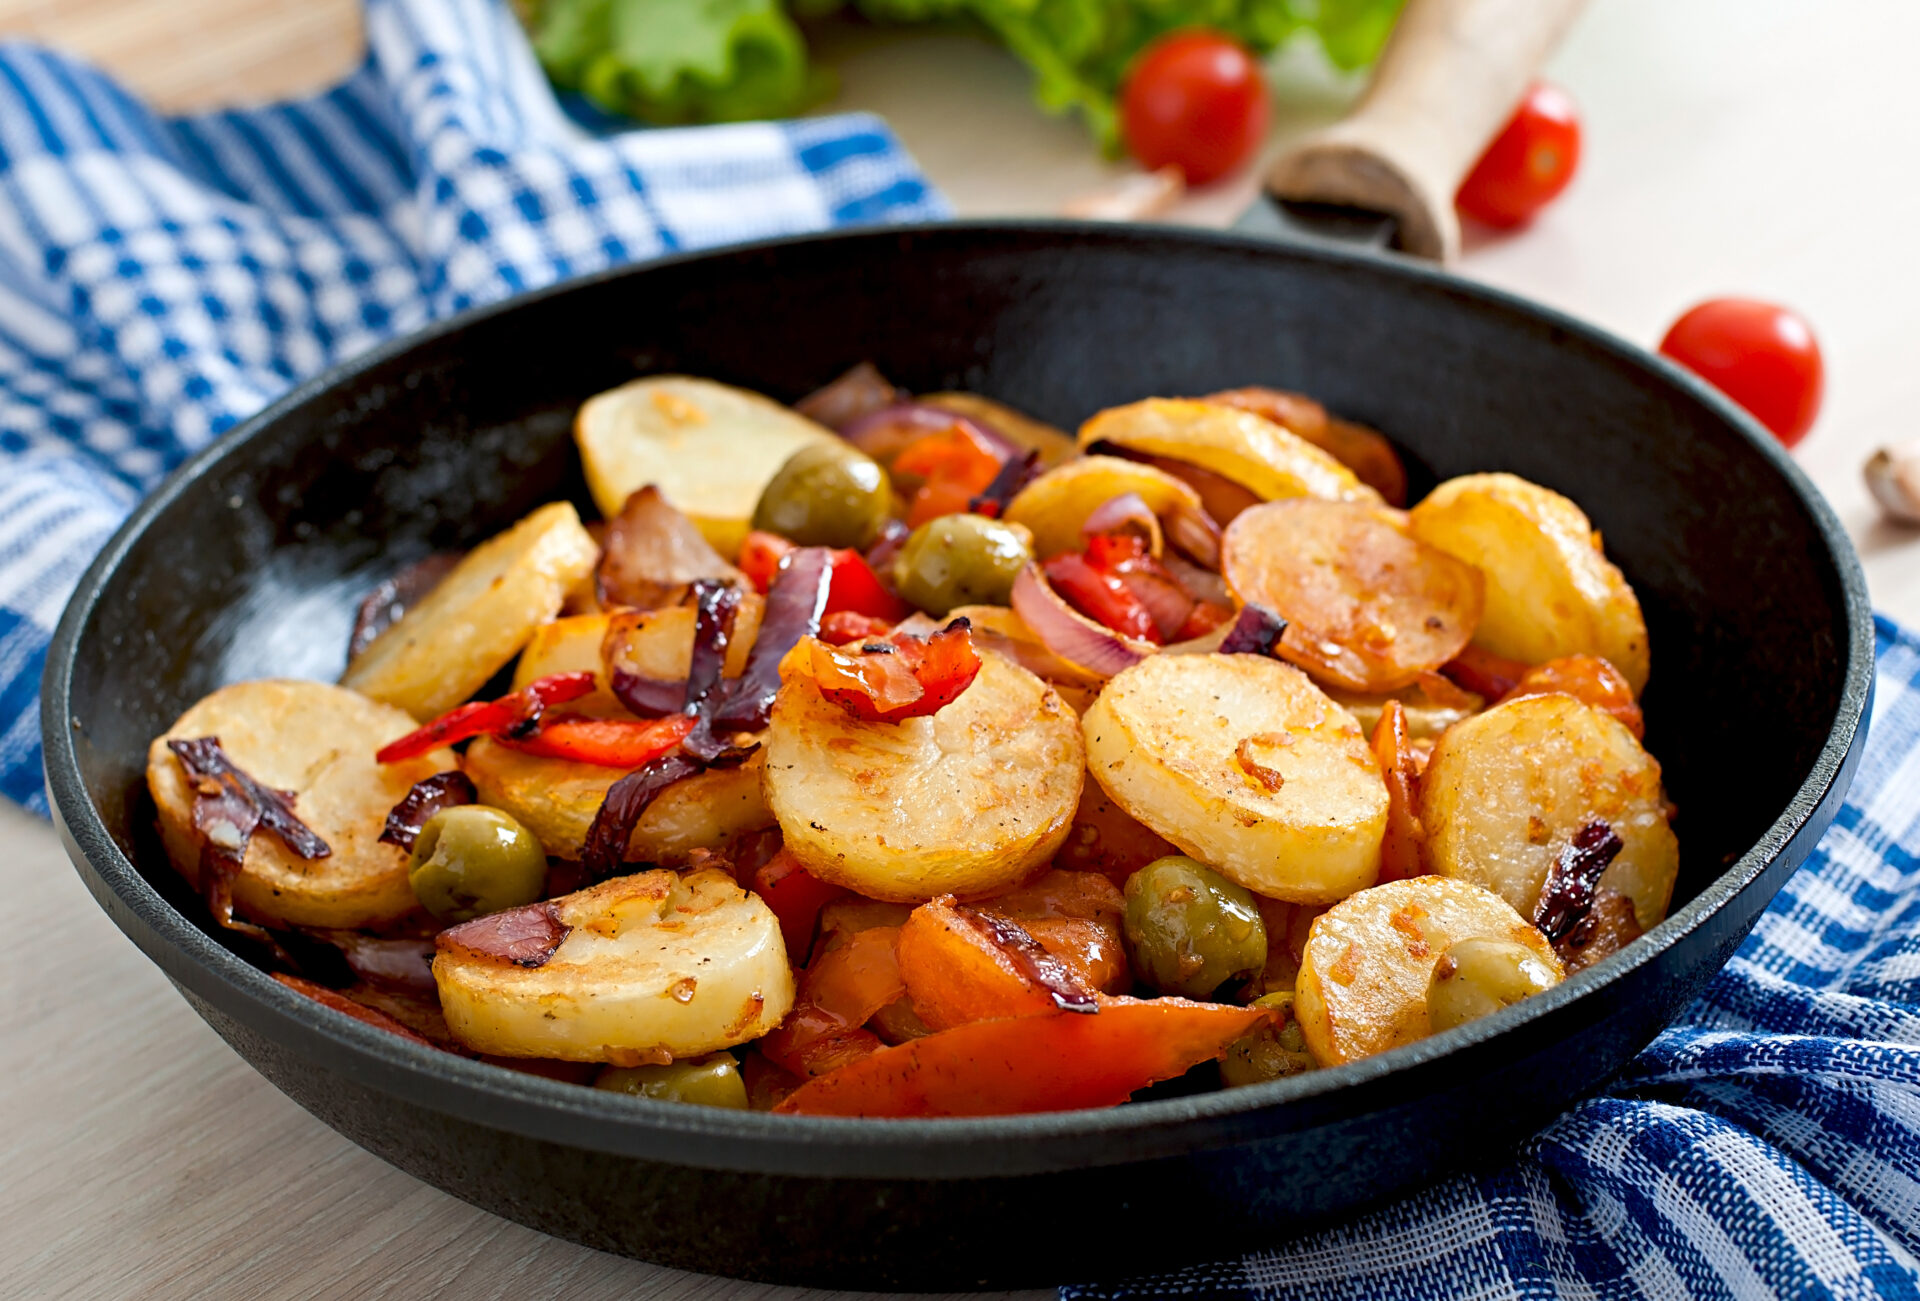 Baked potato with vegetables in a frying pan